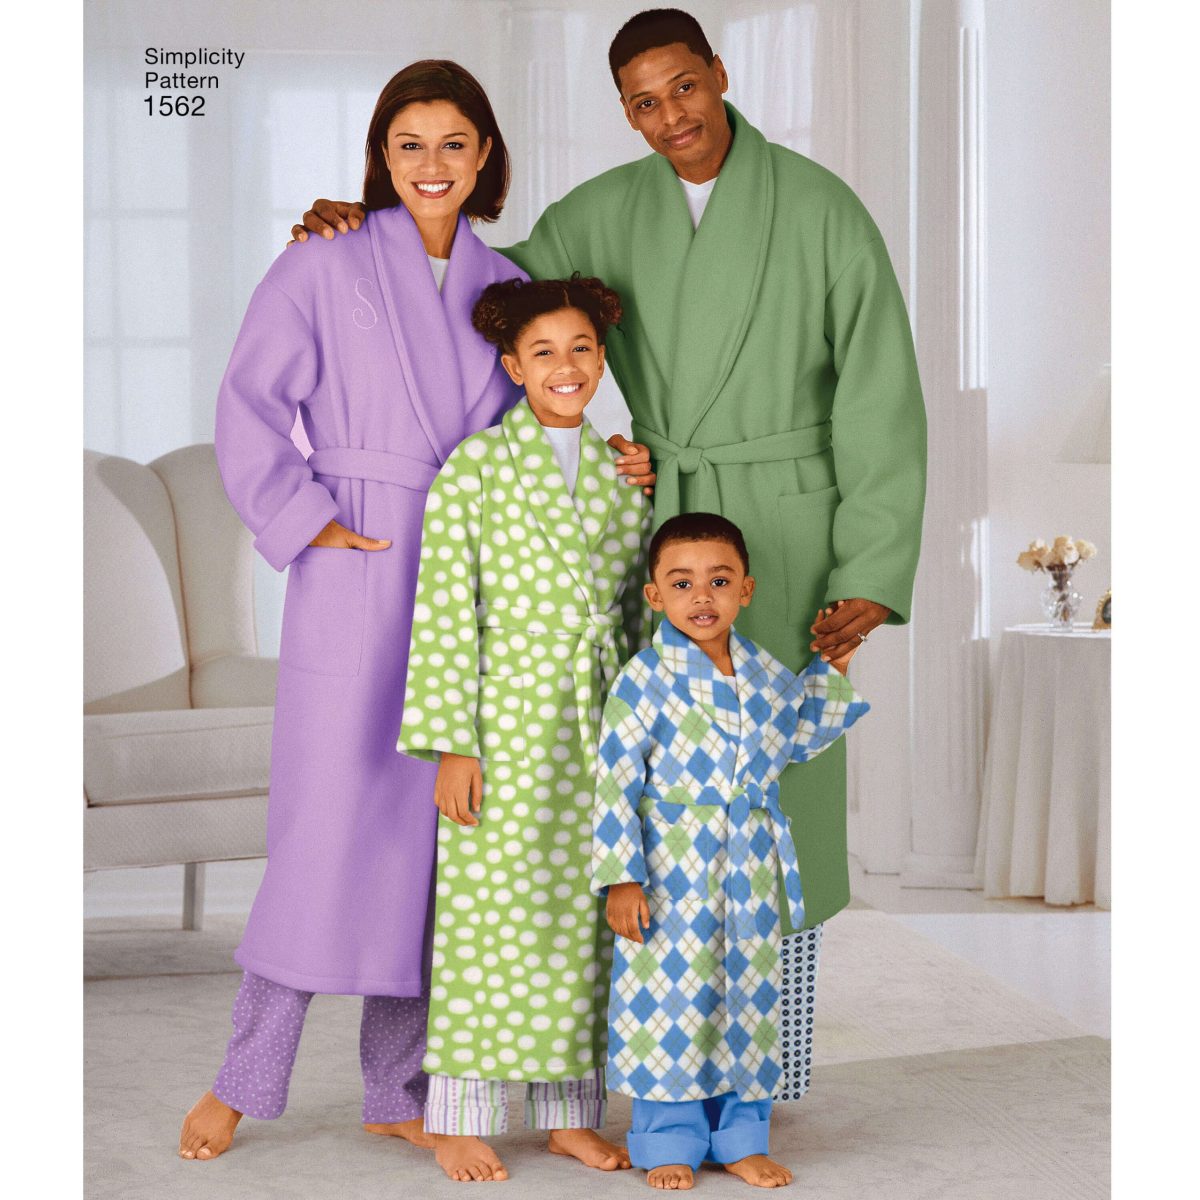 Simplicity Sewing Pattern 1562 Child's, Teens' and Adults' Robe and Belt